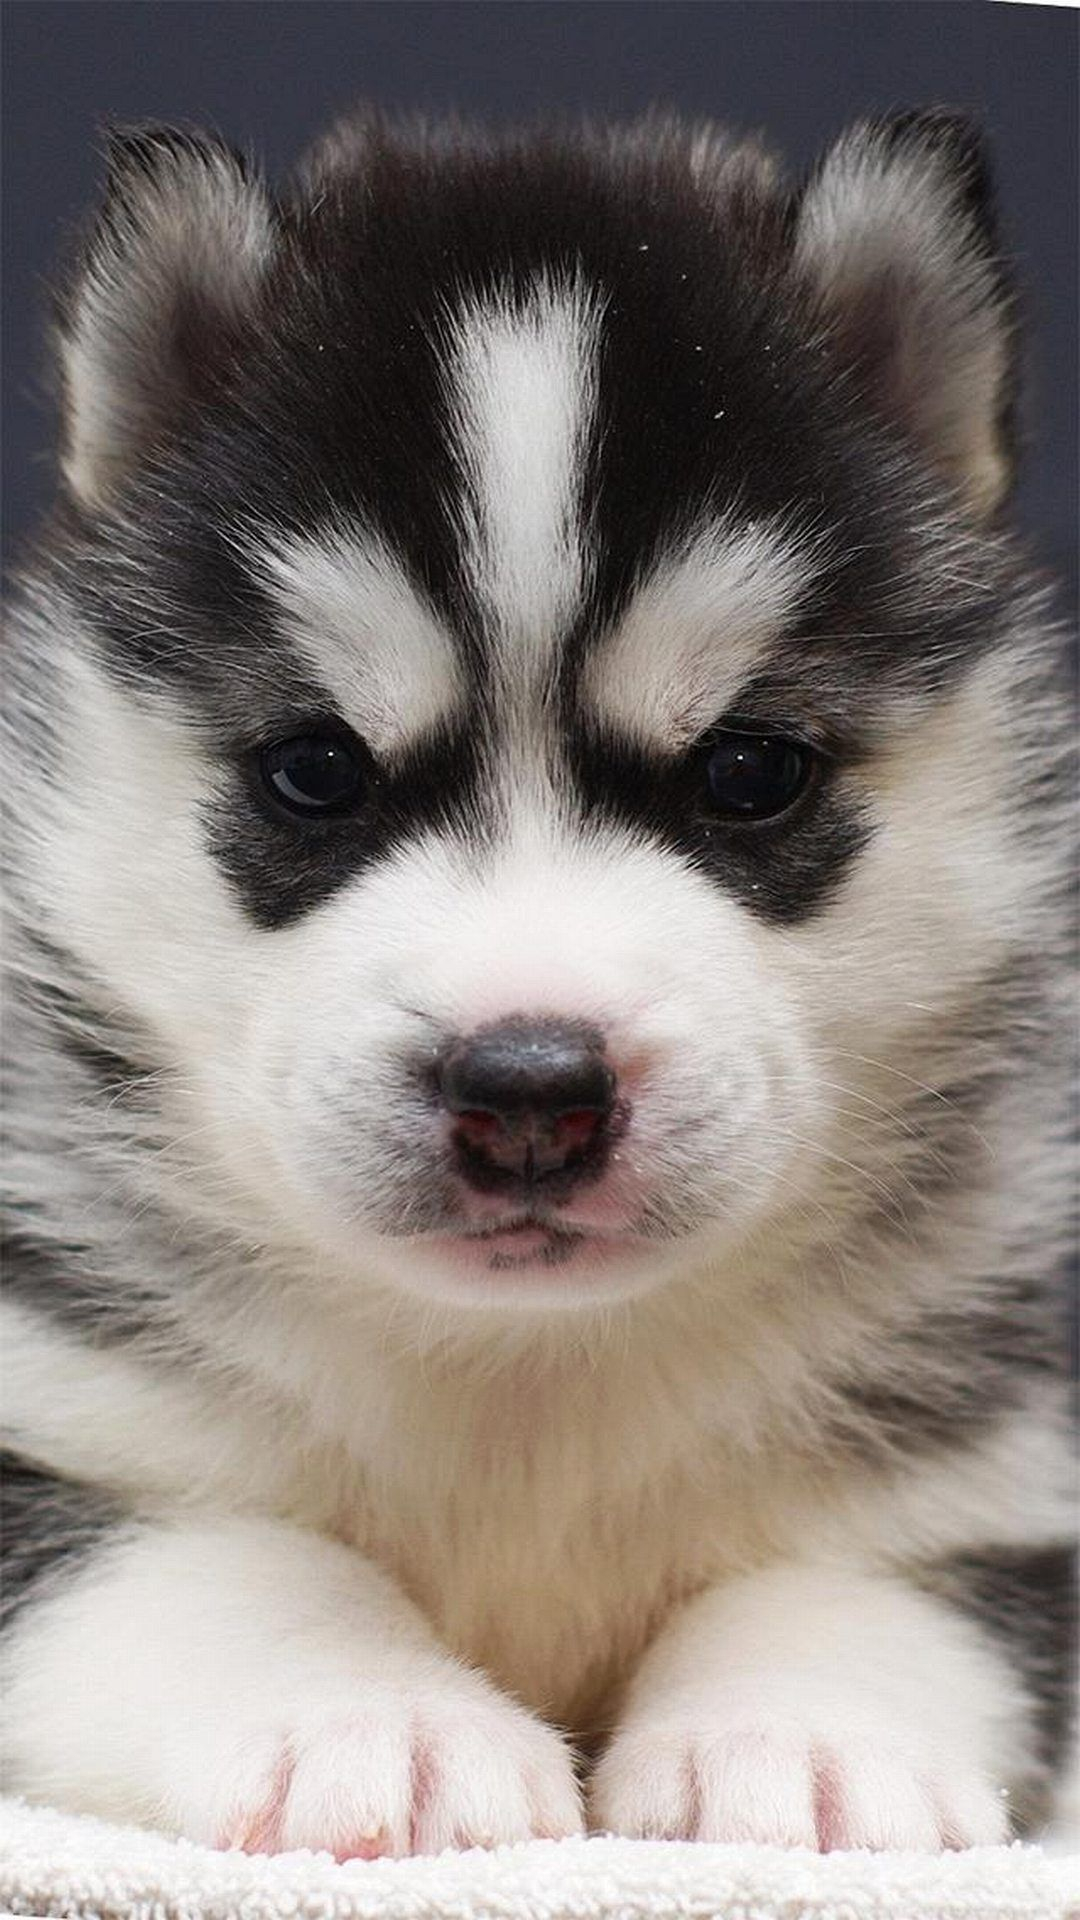 1080x1920 Husky puppy Best htc one wallpapers, free and easy to download | Cute puppy wallpaper, Puppy wallpaper, Cute puppies